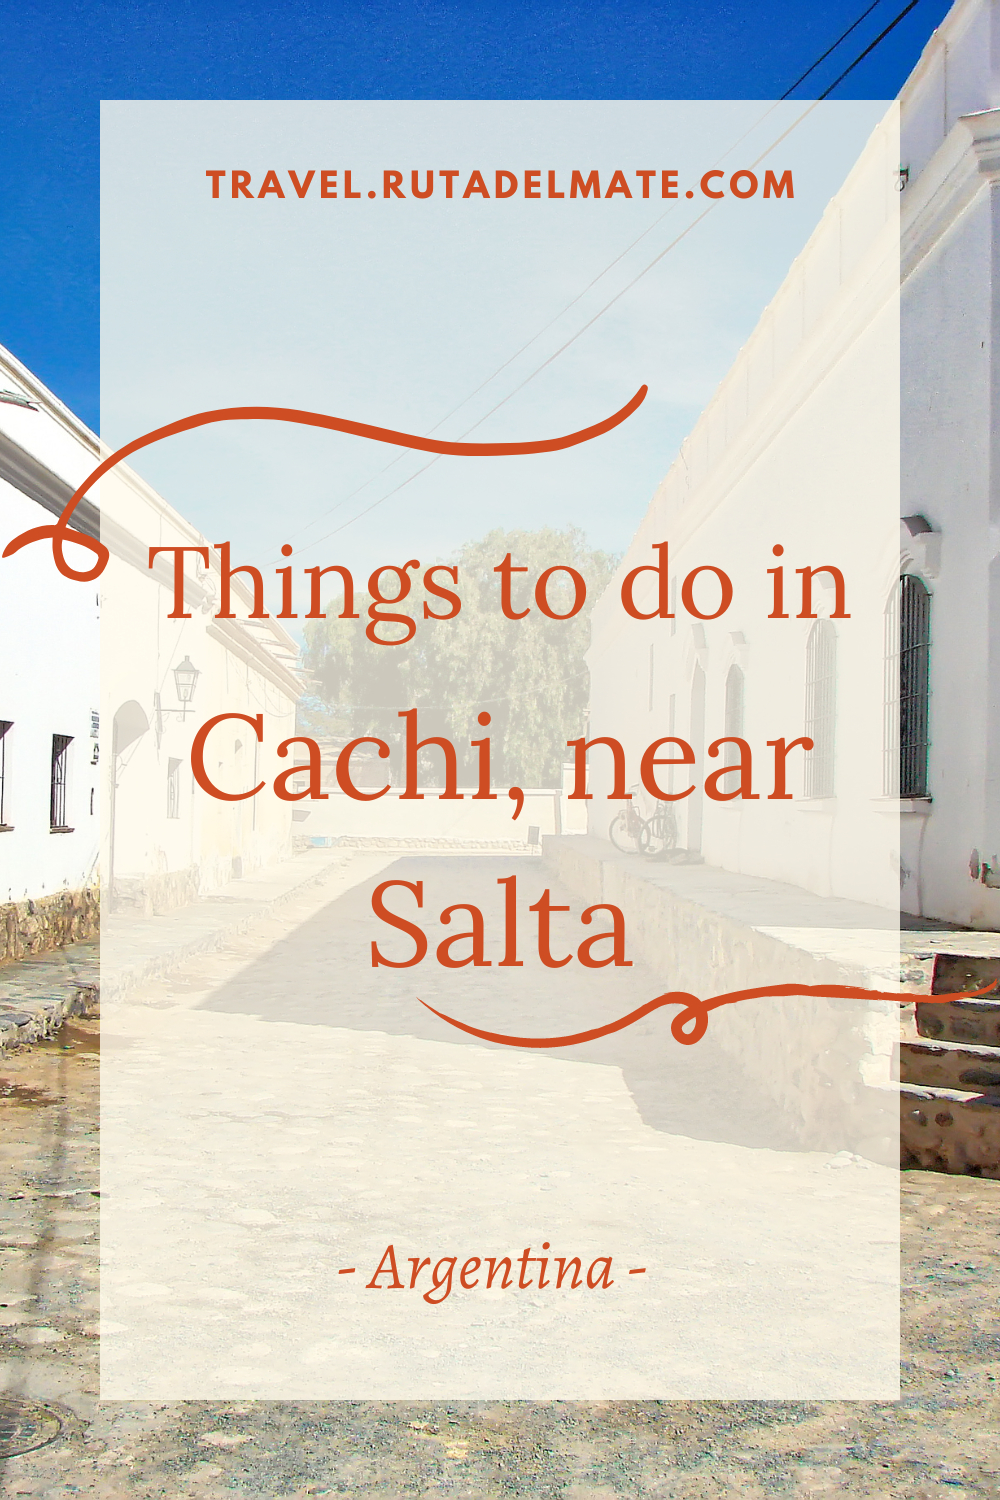 Things to do in Cachi and route 33 from Salta